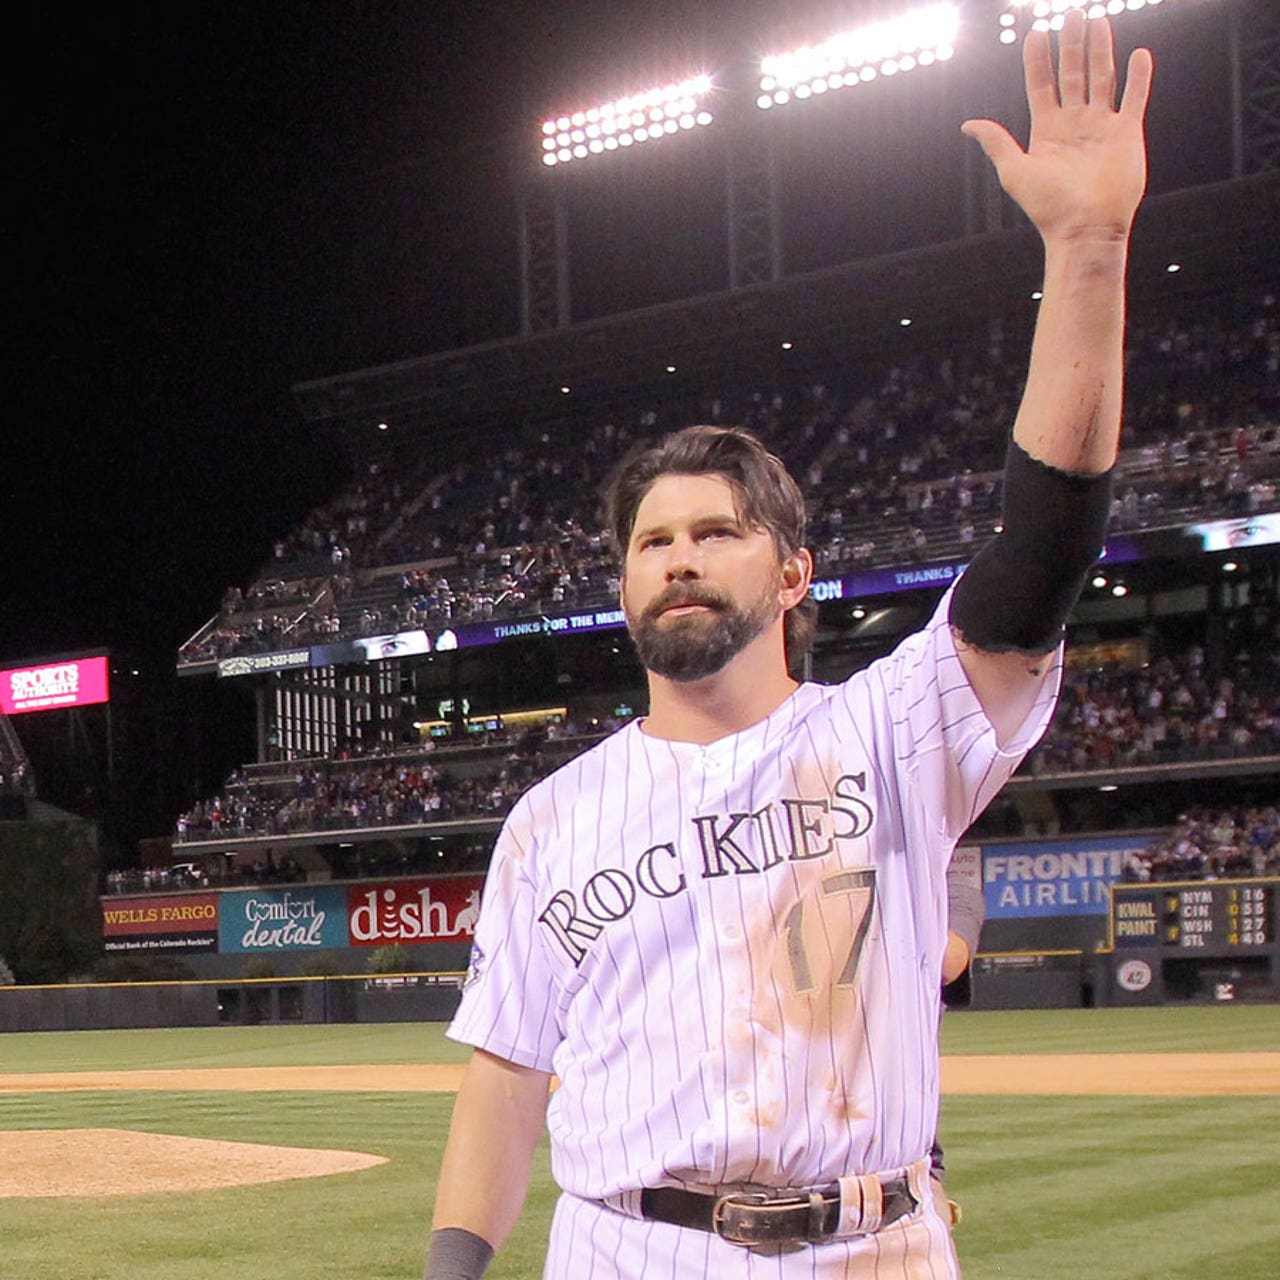 Todd Helton wants to get back into baseball in Colorado: 'I'm